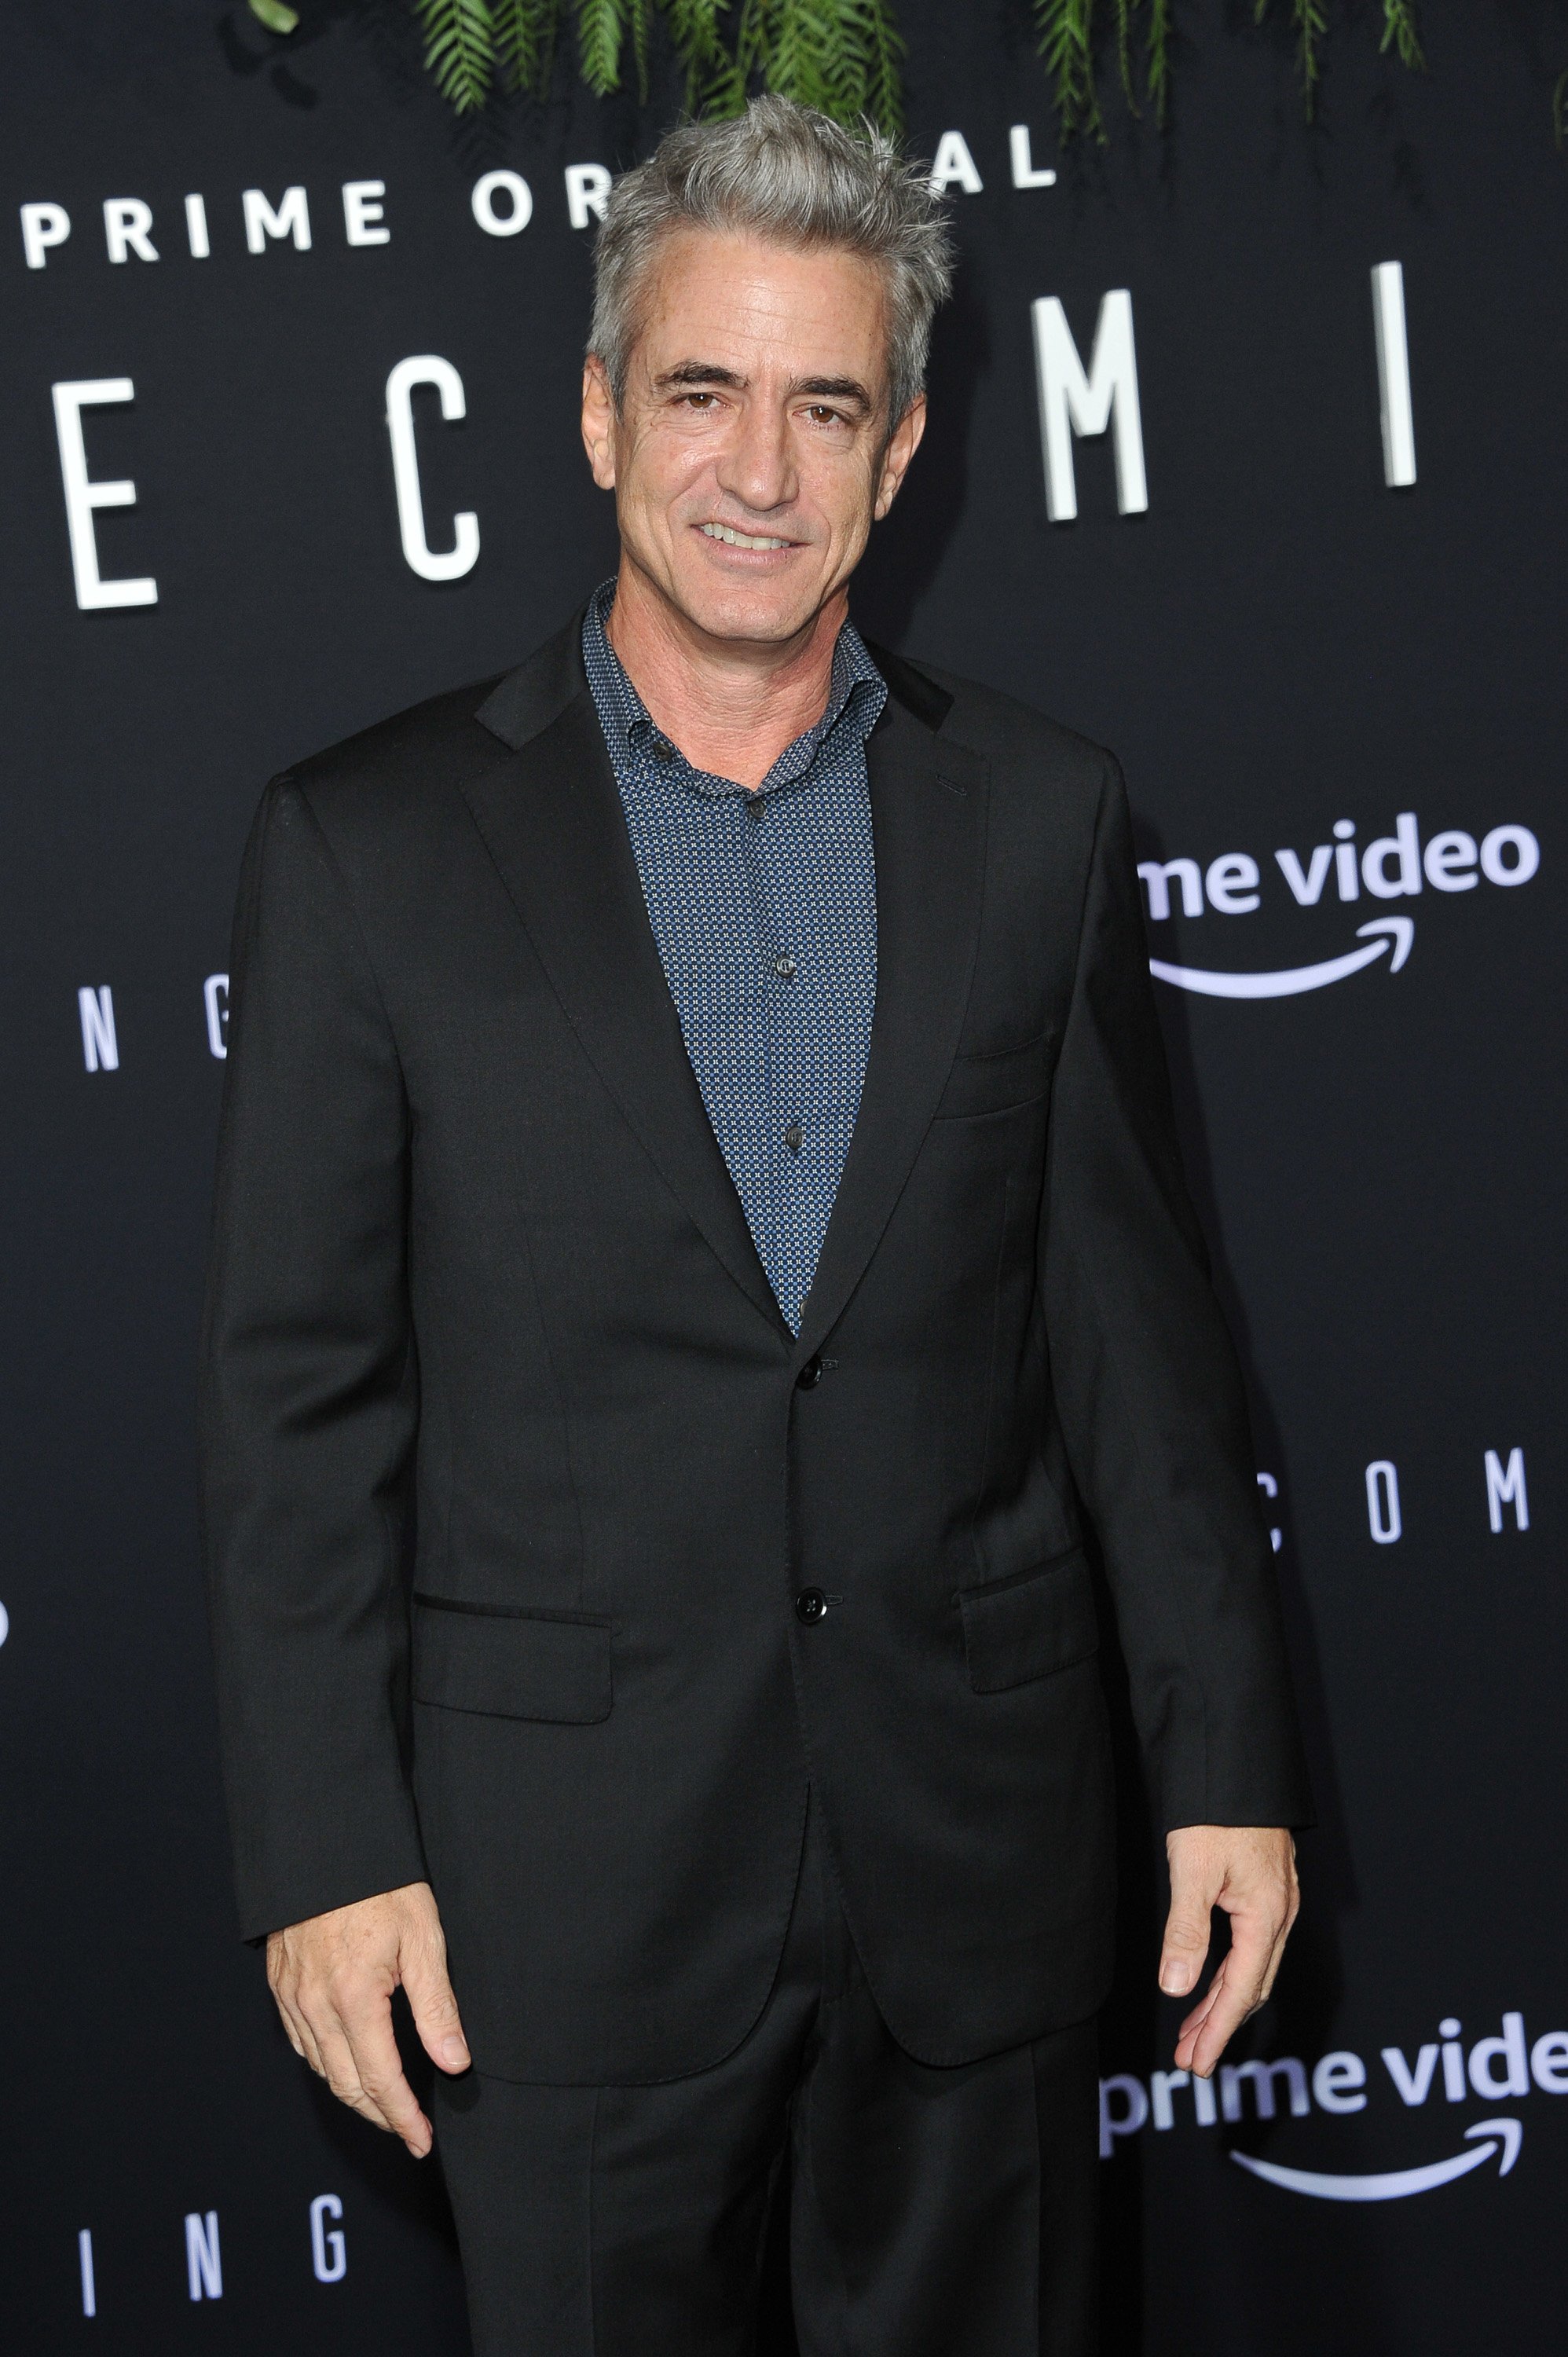 Actor Dermot Mulroney attends the premiere of Amazon Studios' "Homecoming" on October 24, 2018, in Los Angeles, California. | Source: Getty Images